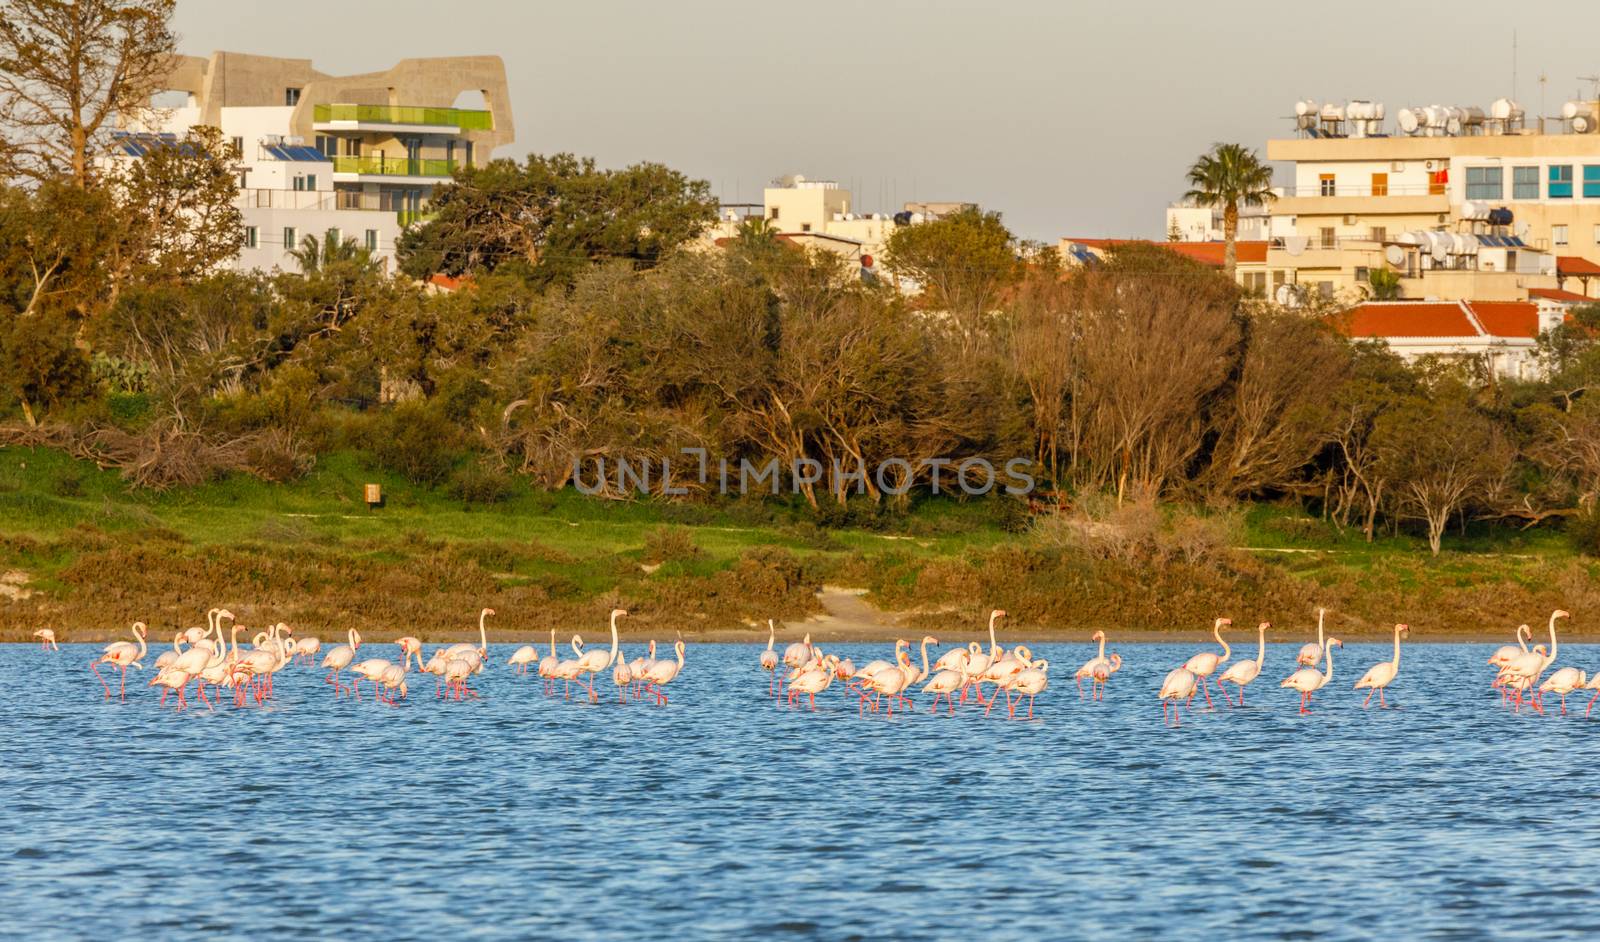 Lots of pink flamingos marching across the lake with residential by ambeon